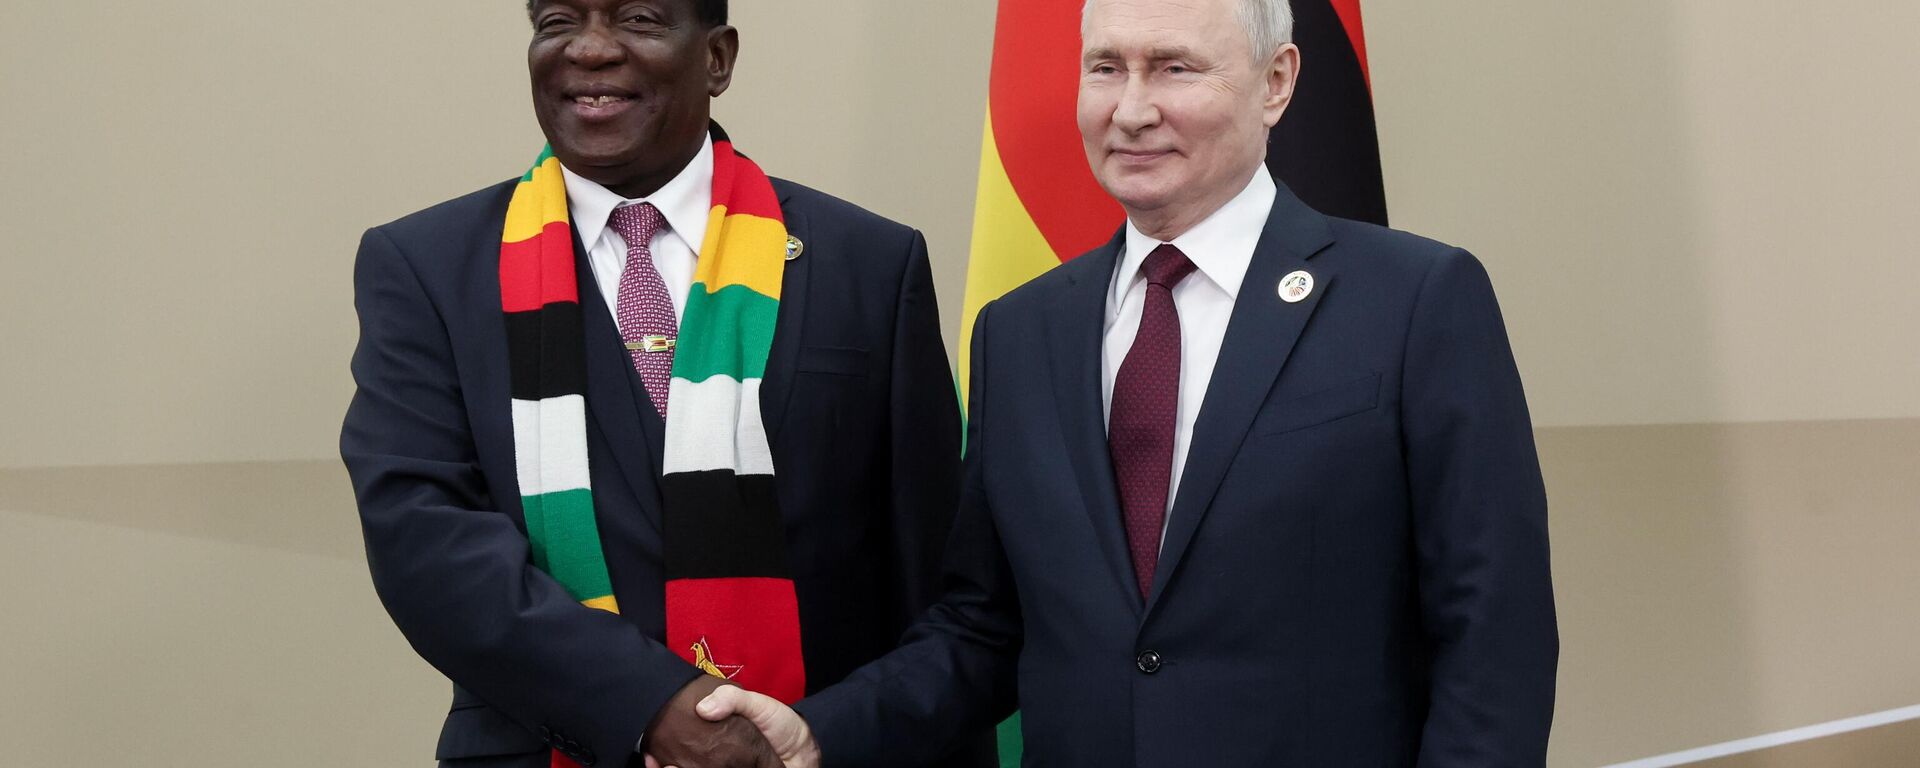 Russian President Vladimir Putin and President of the Republic of Zimbabwe Emerson Mnangagwa during a meeting on the sidelines of the II Russia-Africa Summit and Forum in St. Petersburg, July 27, 2023 - Sputnik Africa, 1920, 27.07.2023